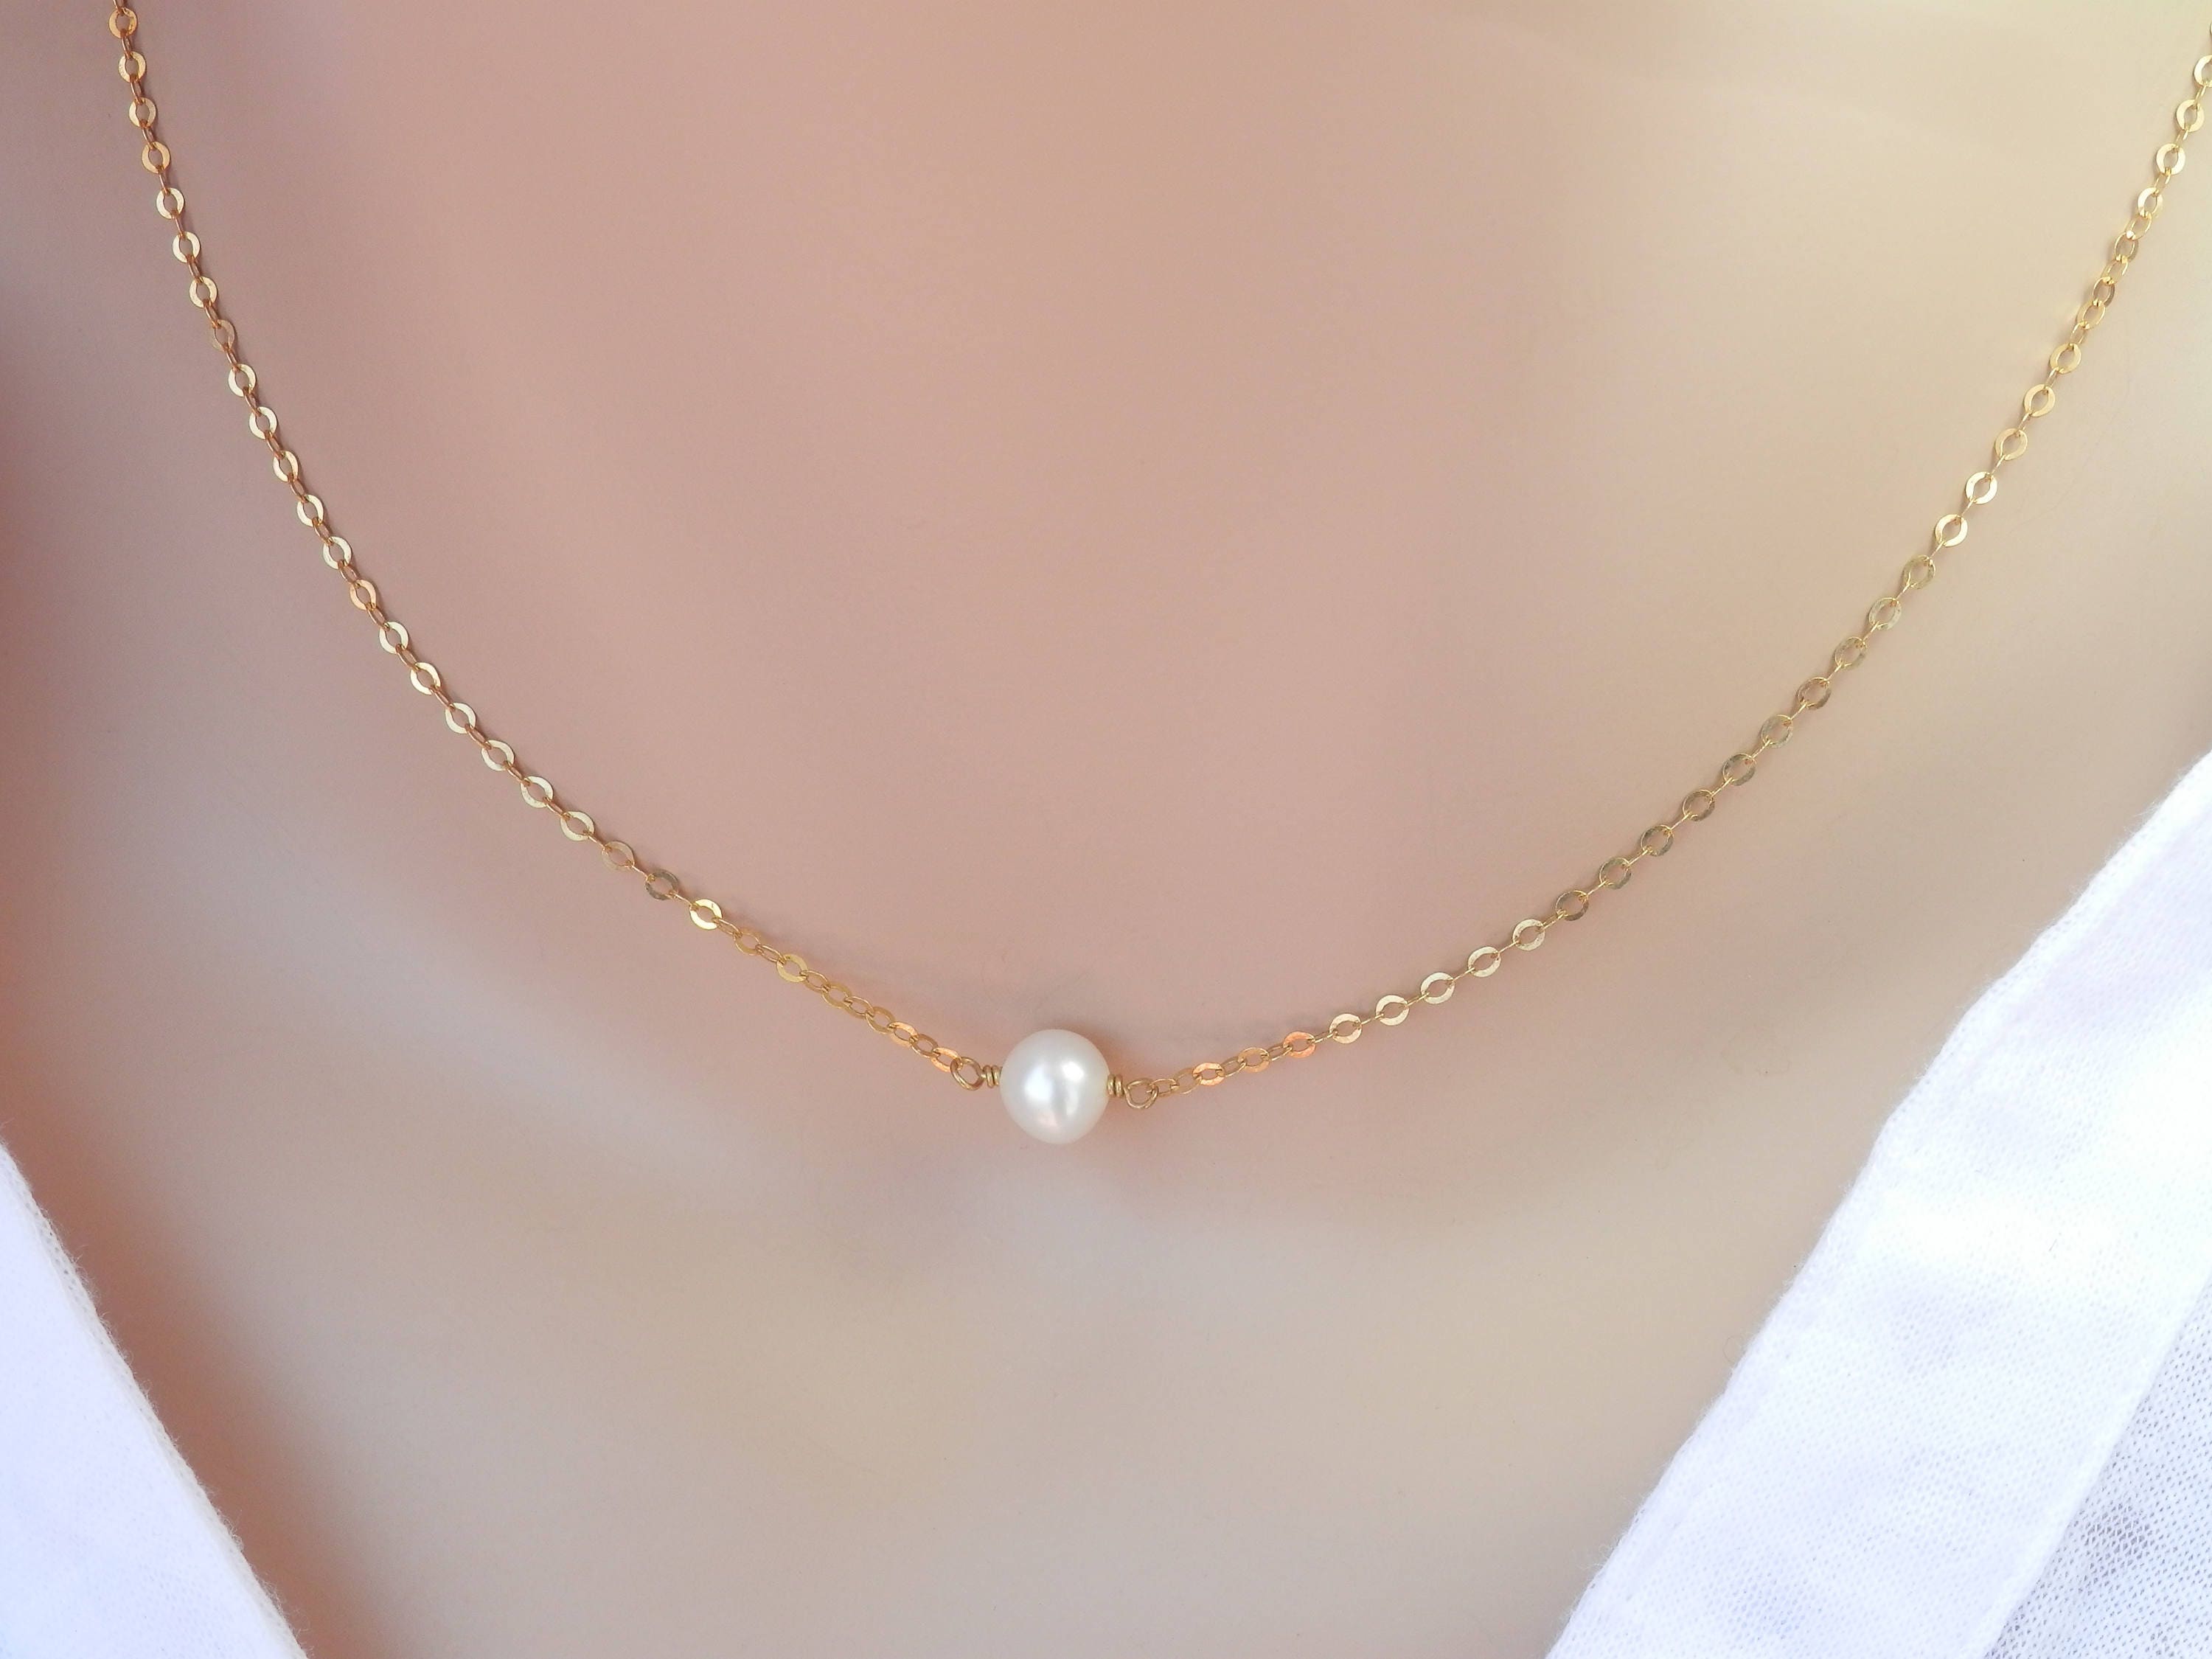 Single Pearl Necklace Dainty Thin Gold Chain Bridesmaid Gift Etsy